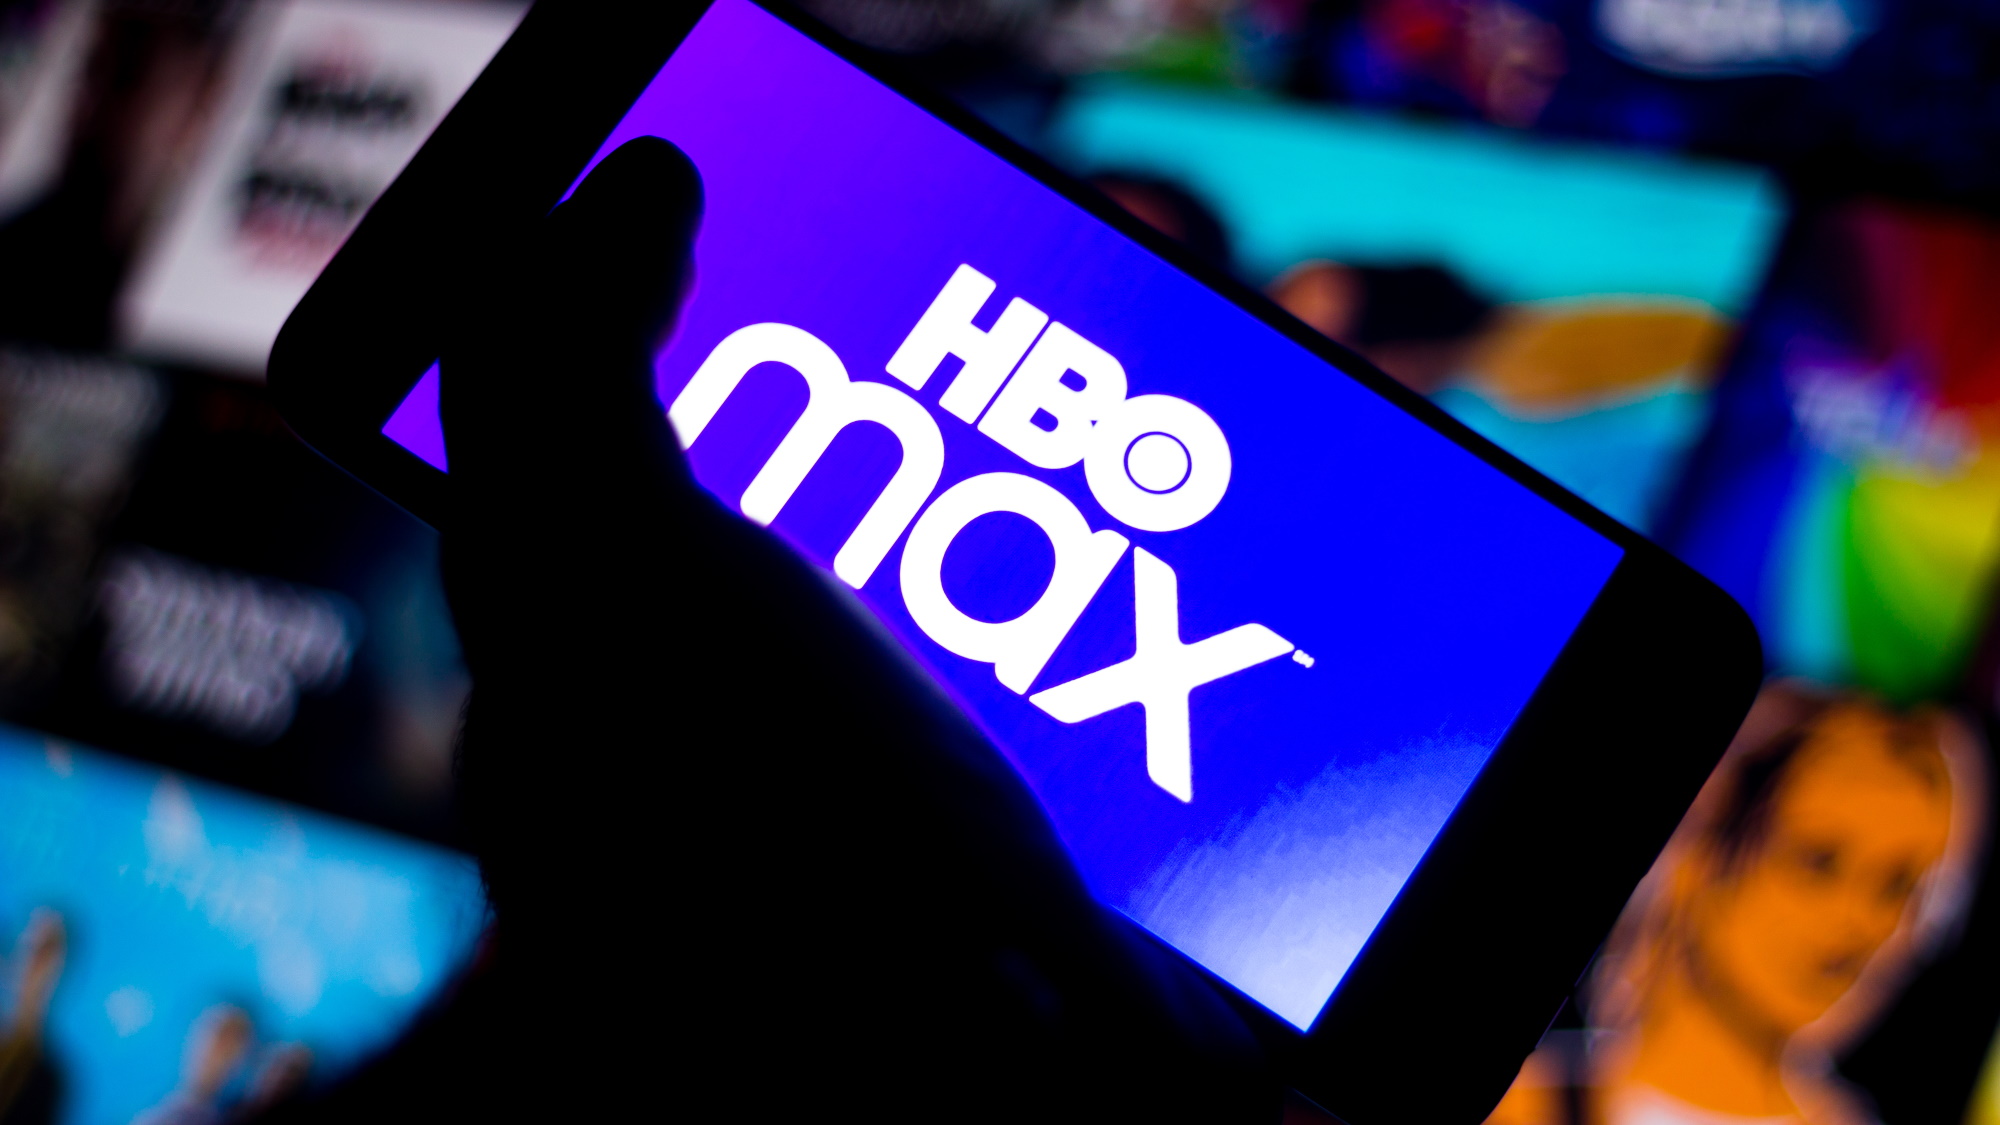 Hbo Max Movies Shows And Everything About The Streaming Service Explained Techradar